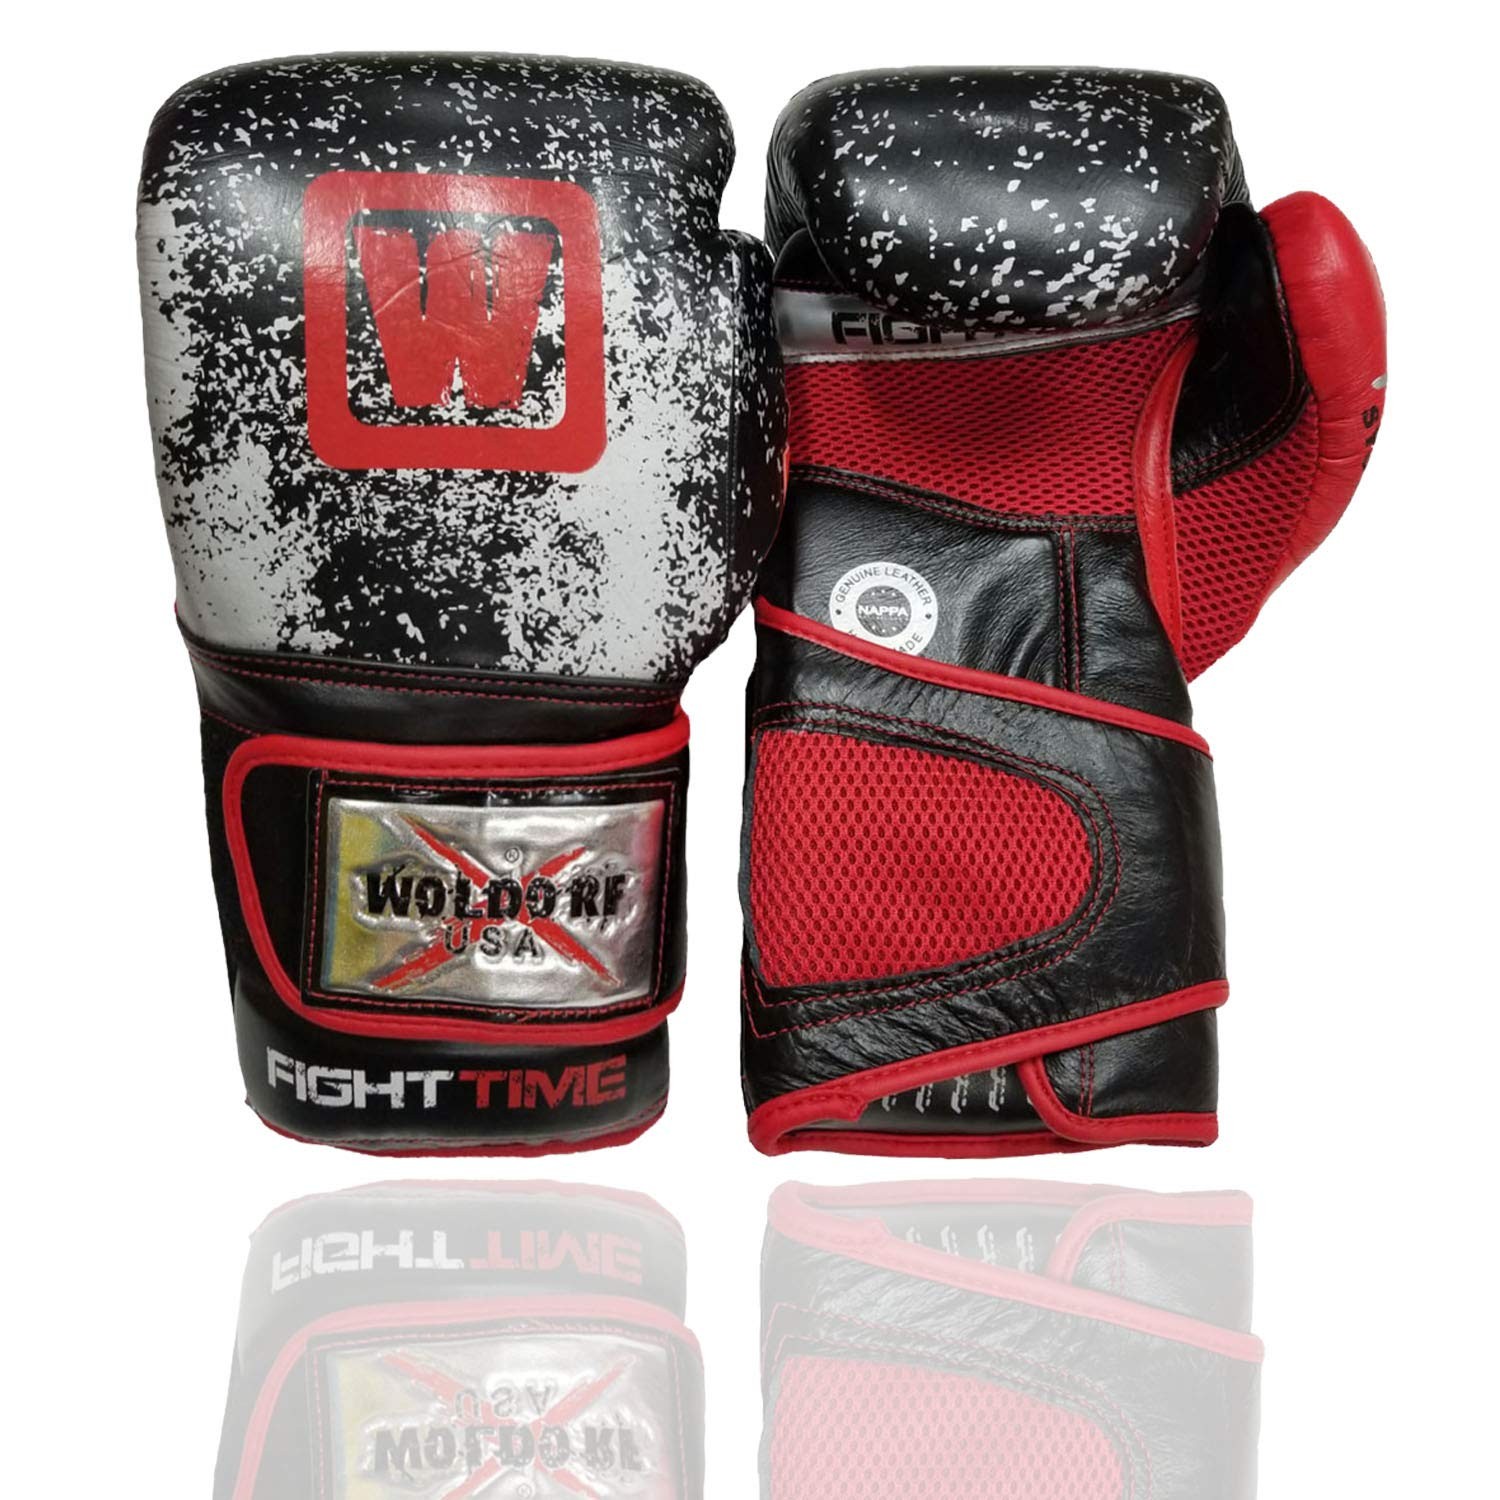 WOLDORF USA PRO Boxing Gloves in leather – Woldorf USA Inc